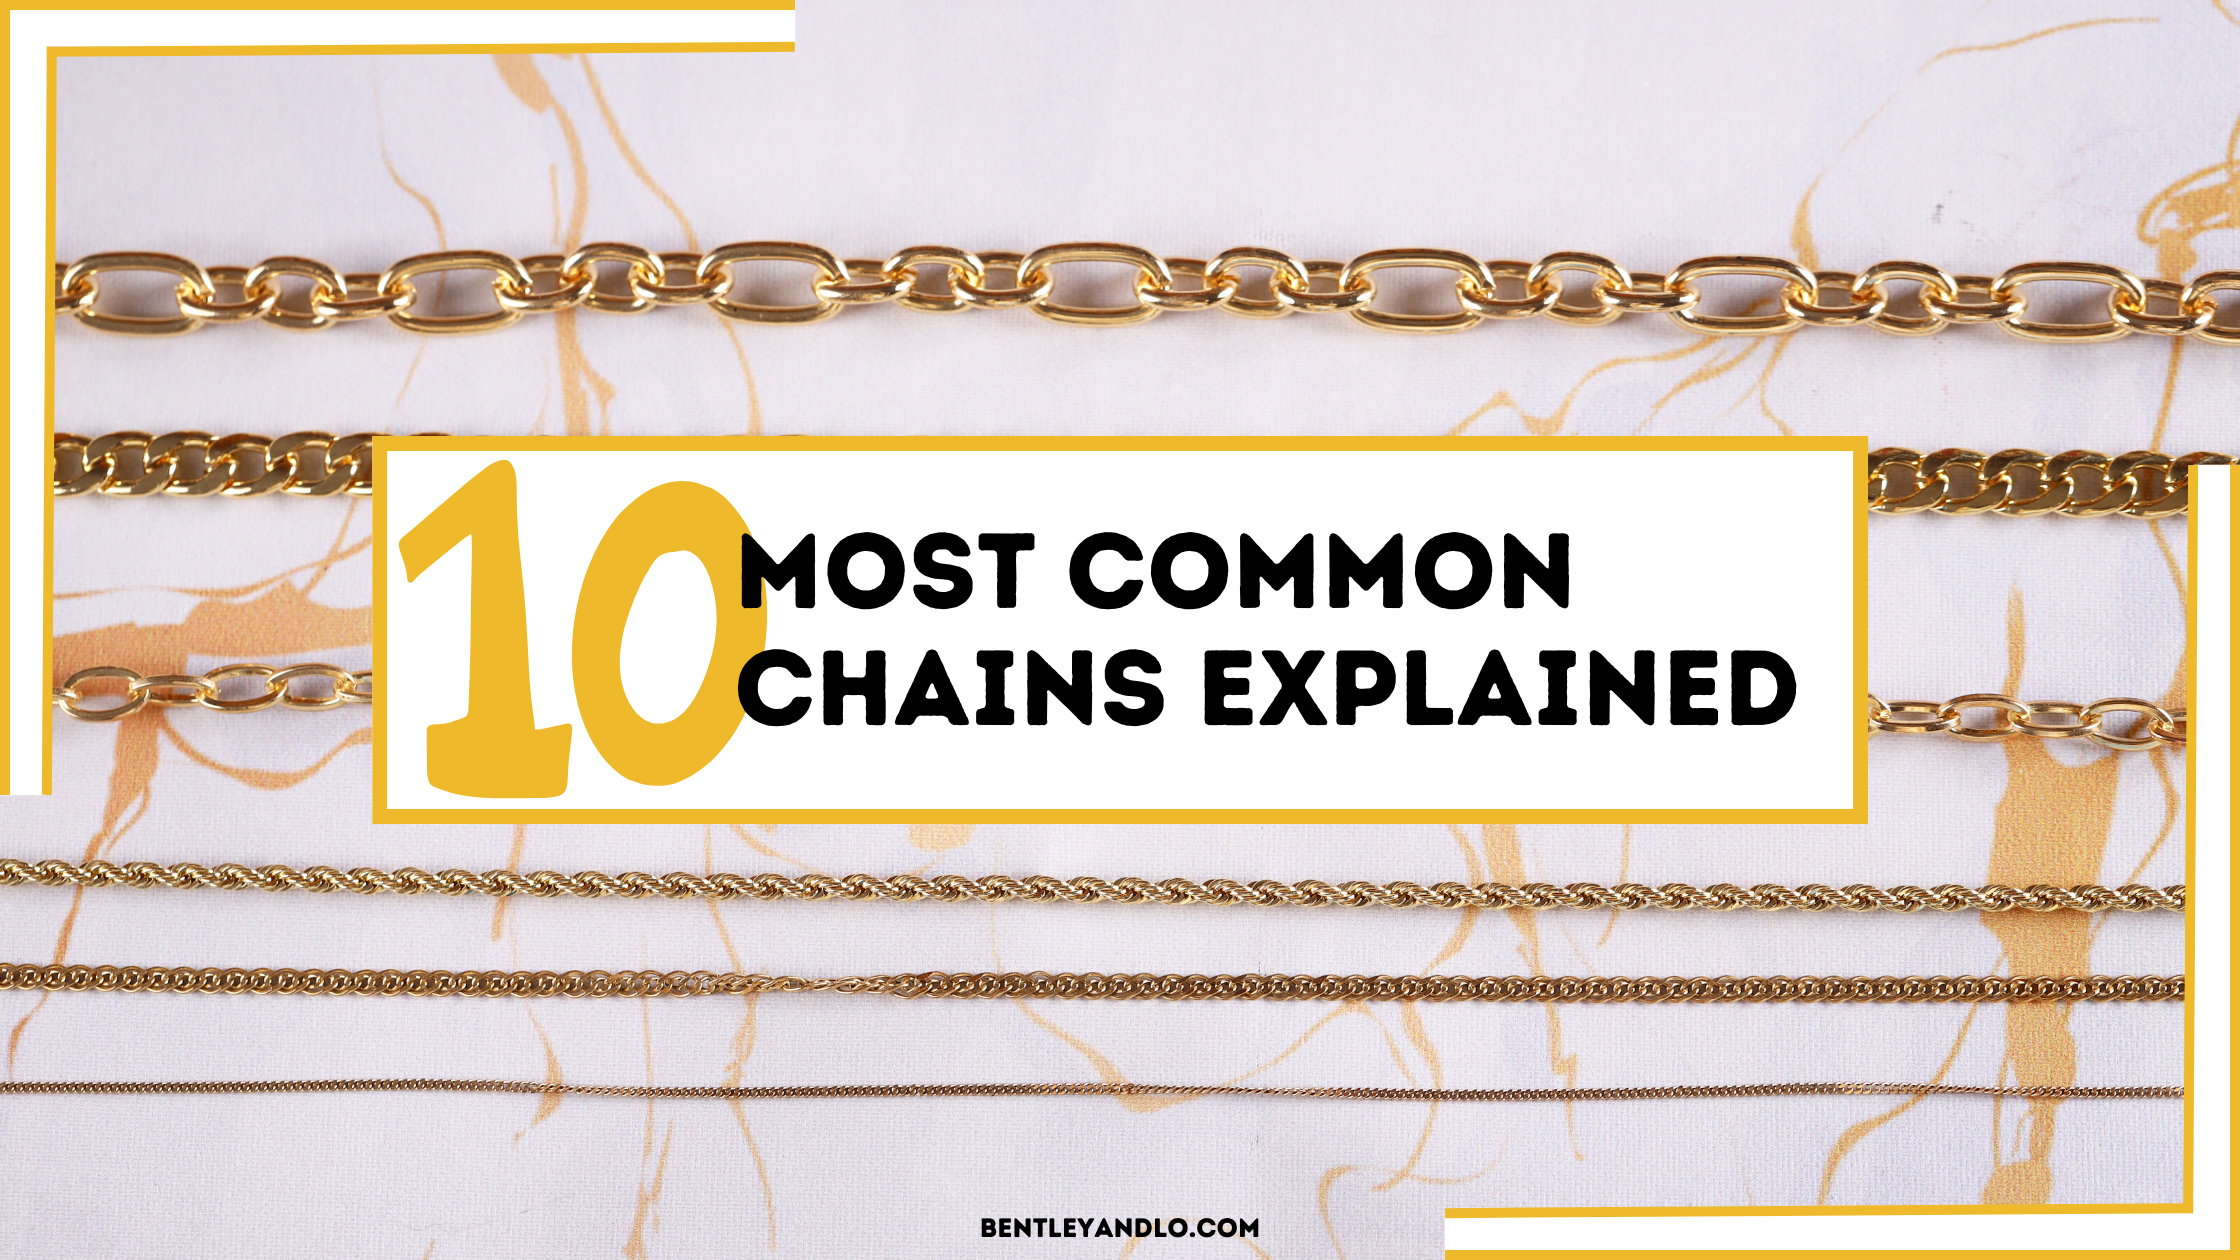 Ten Most Common Chains Explained